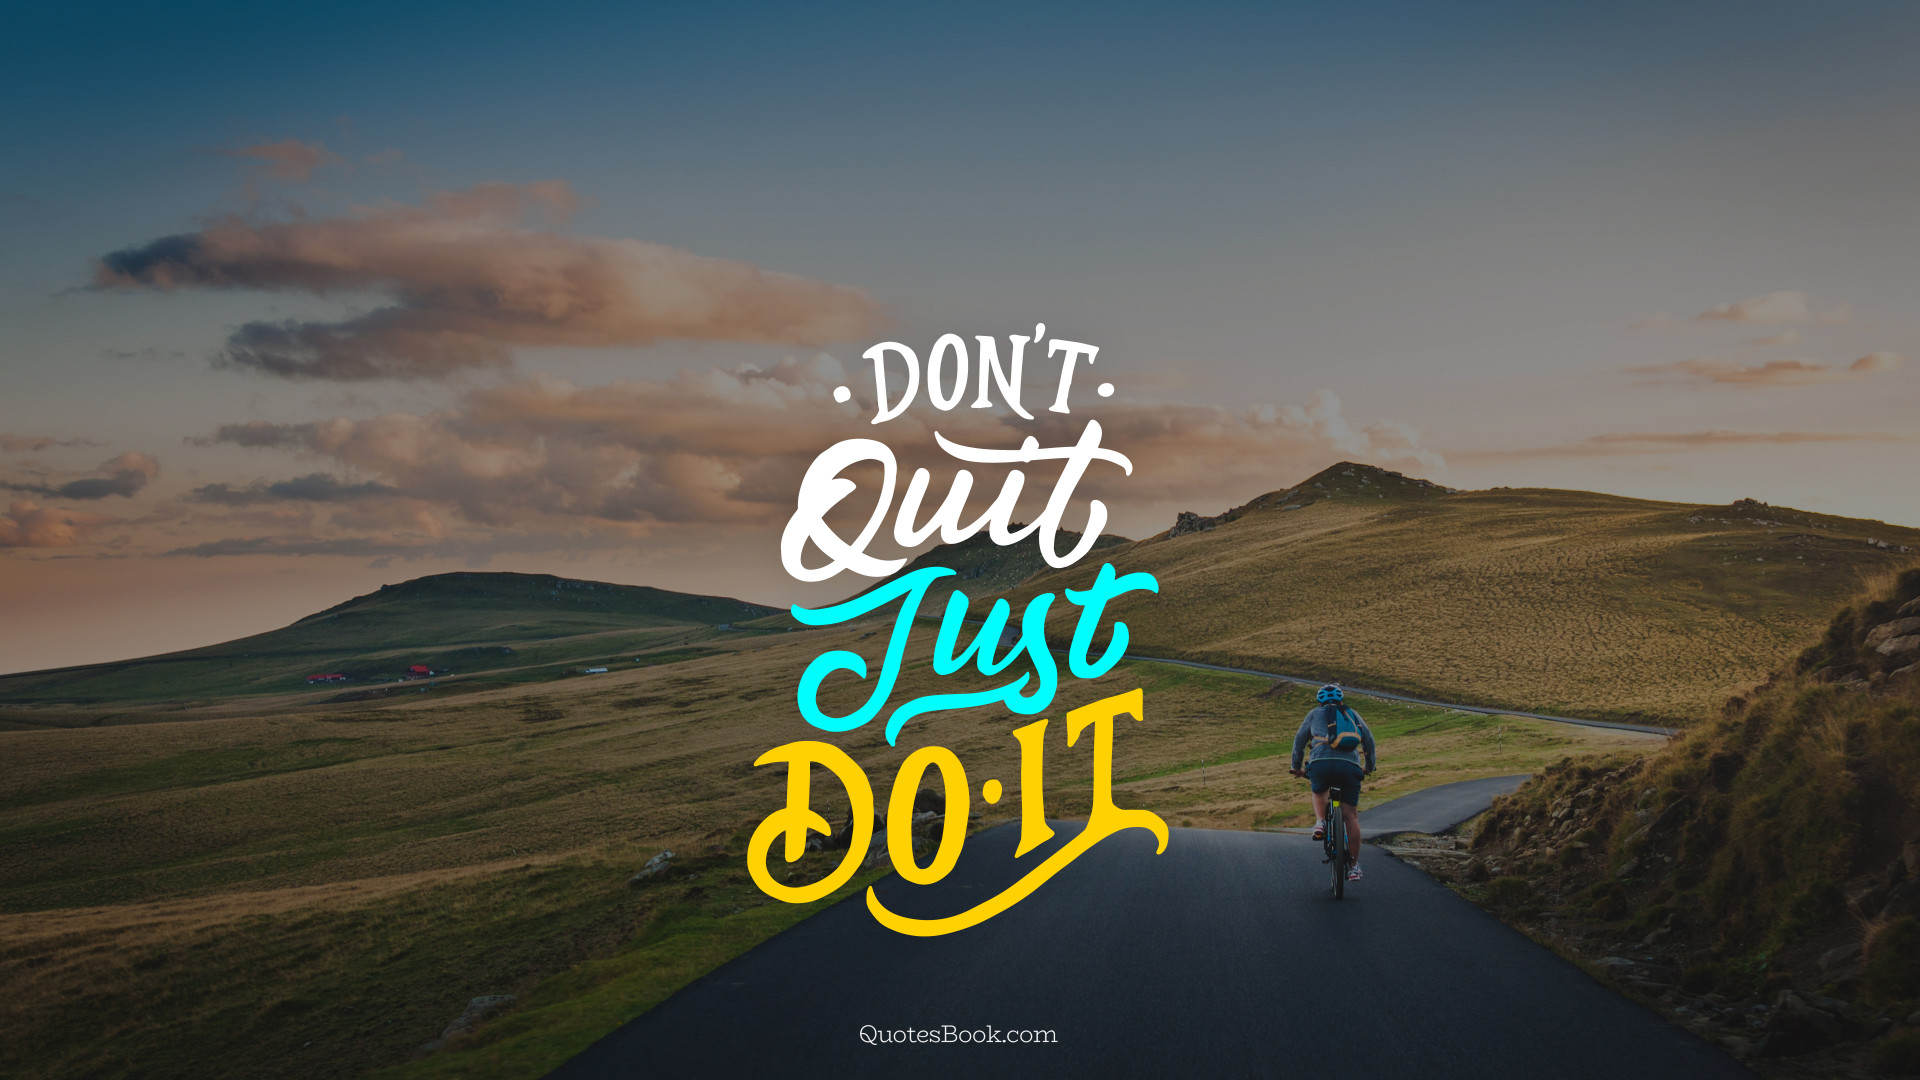 Don't quit just do it - QuotesBook